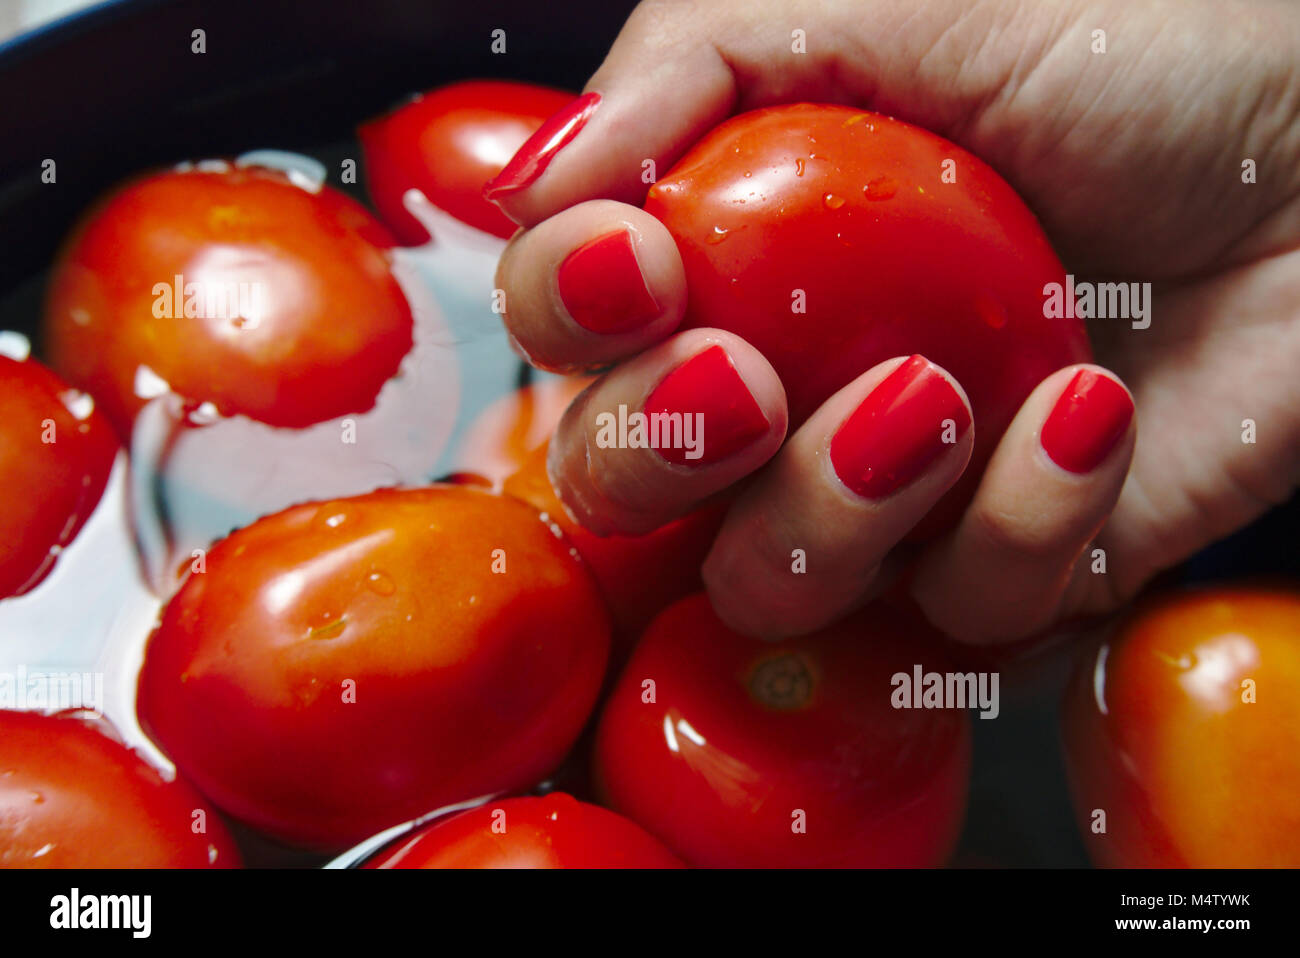 Woman selecting roma tomatoes from water and showing the hand with beautiful red nails. Stock Photo